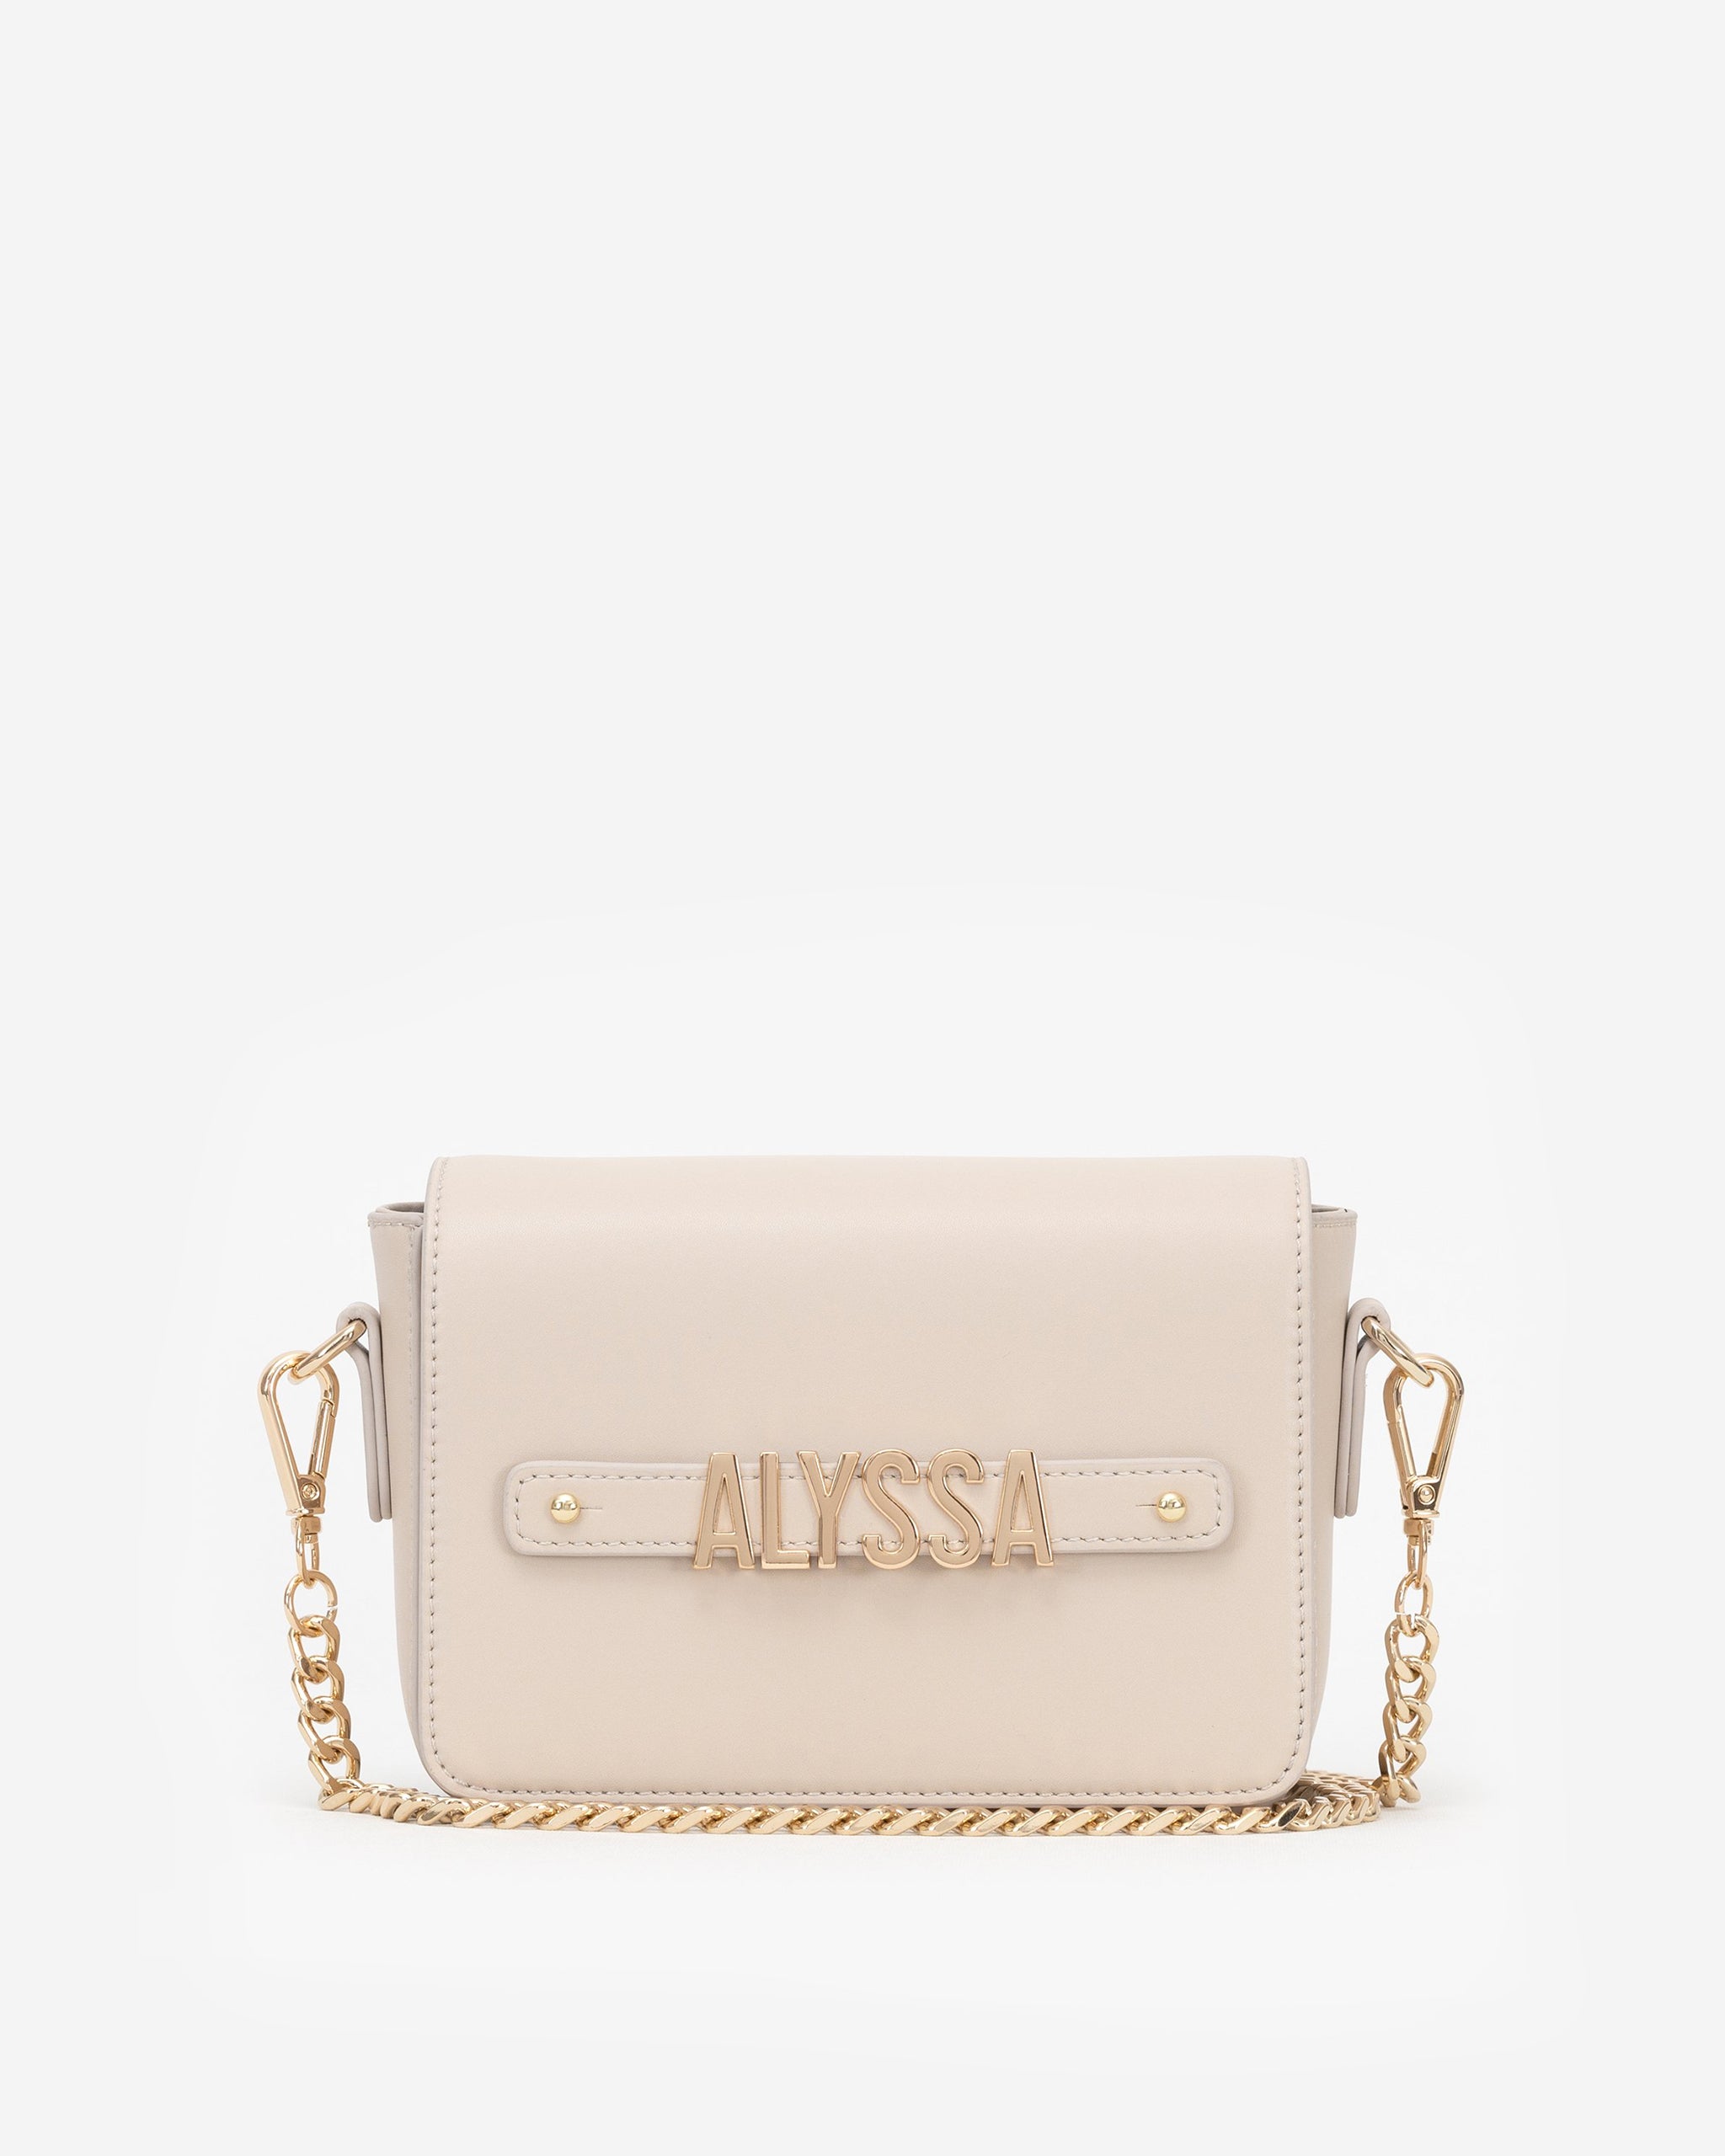 Crossbody Bag in Light Sand with Personalised Hardware